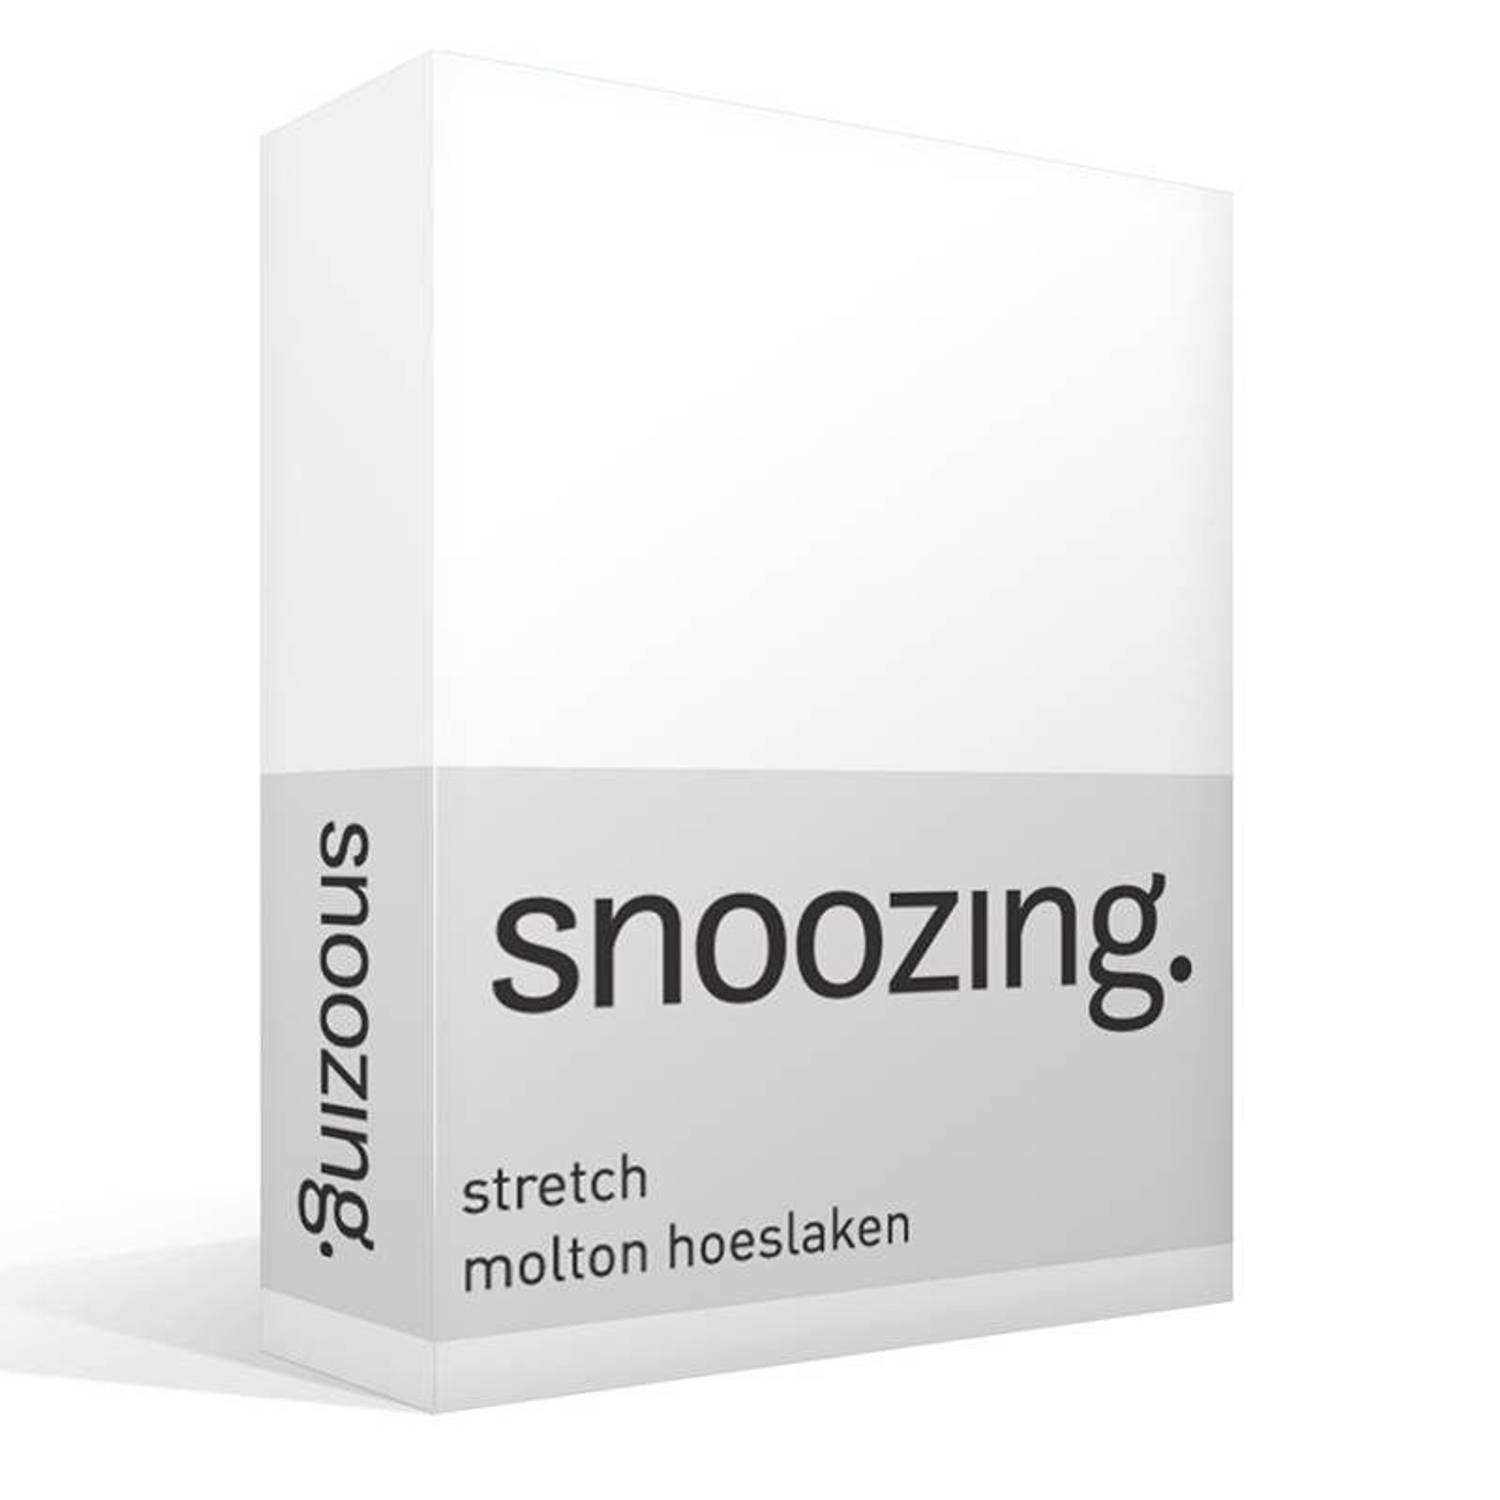 Snoozing stretch molton hoeslaken